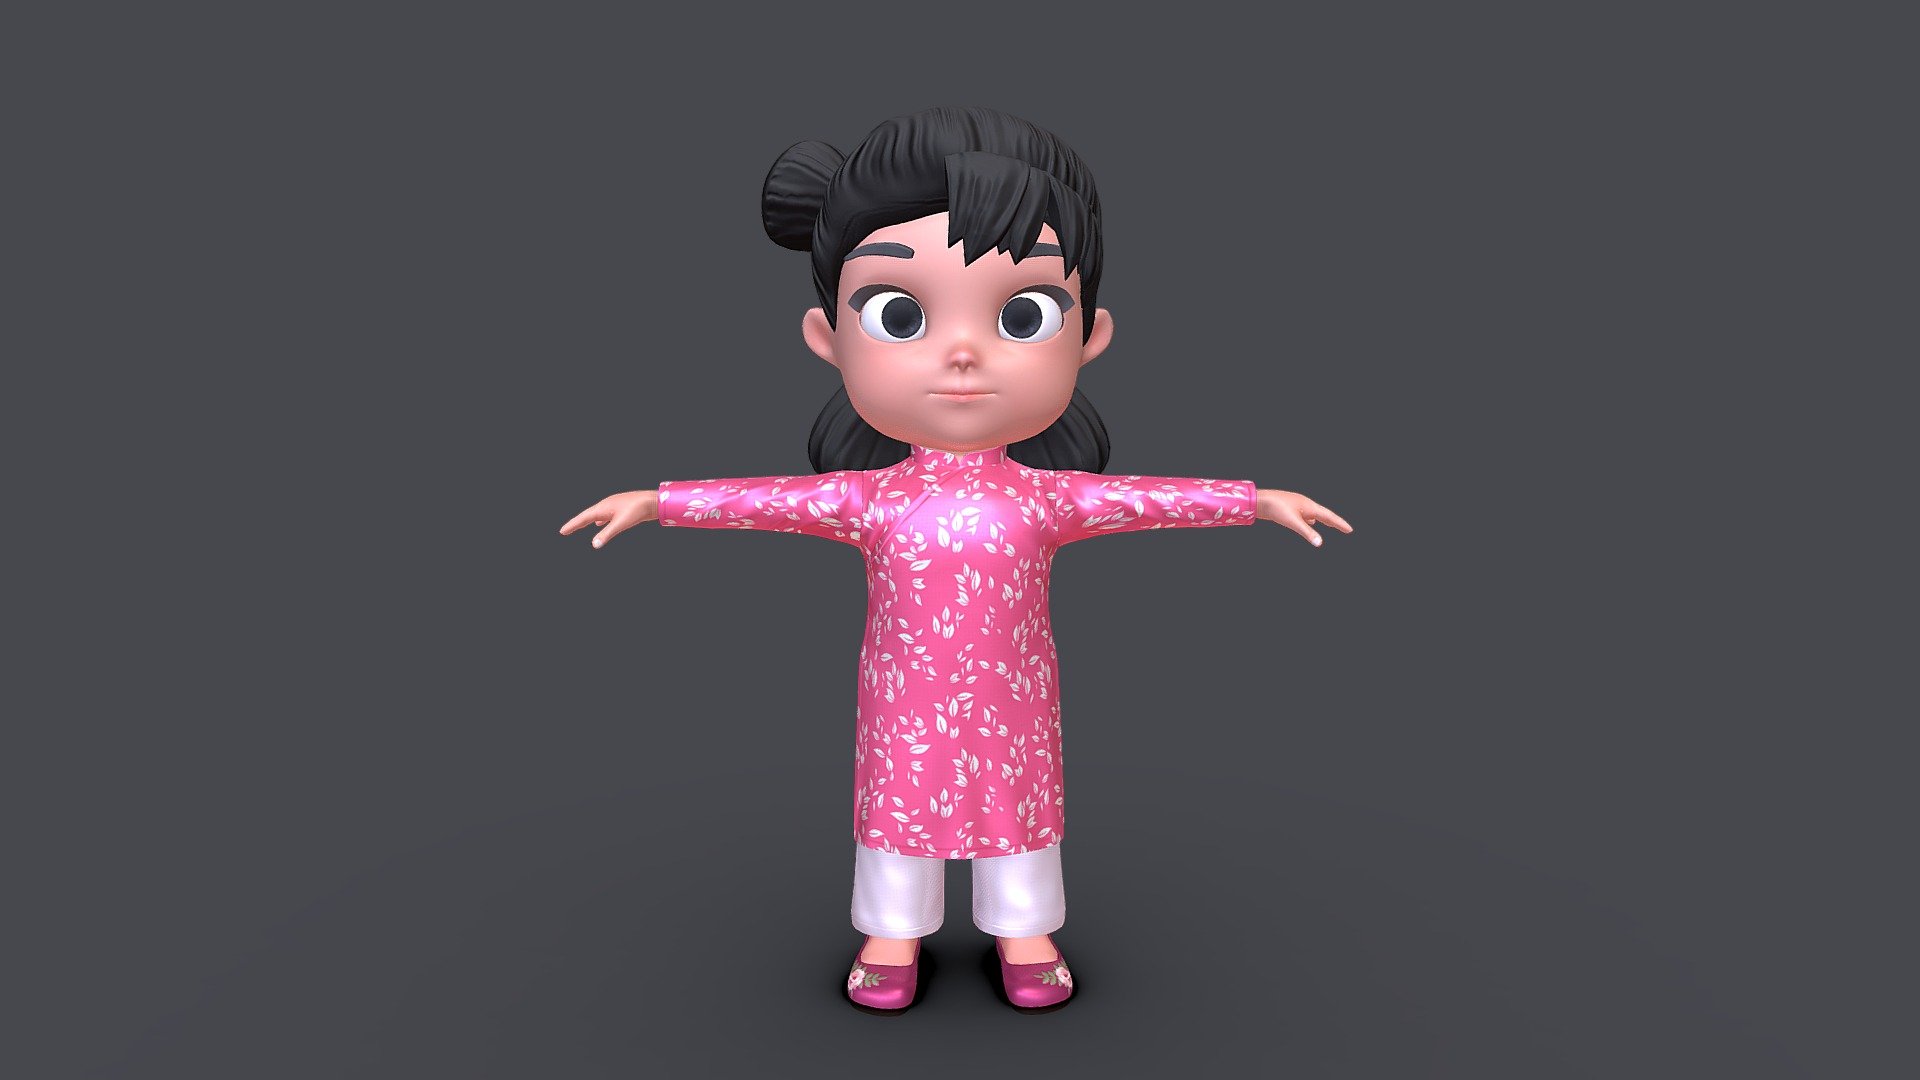 Asset - Cartoons - Character - Girl - Baby - Rig - Buy Royalty Free 3D model  by InCom Studio (@incomstudio) [e325bf2]